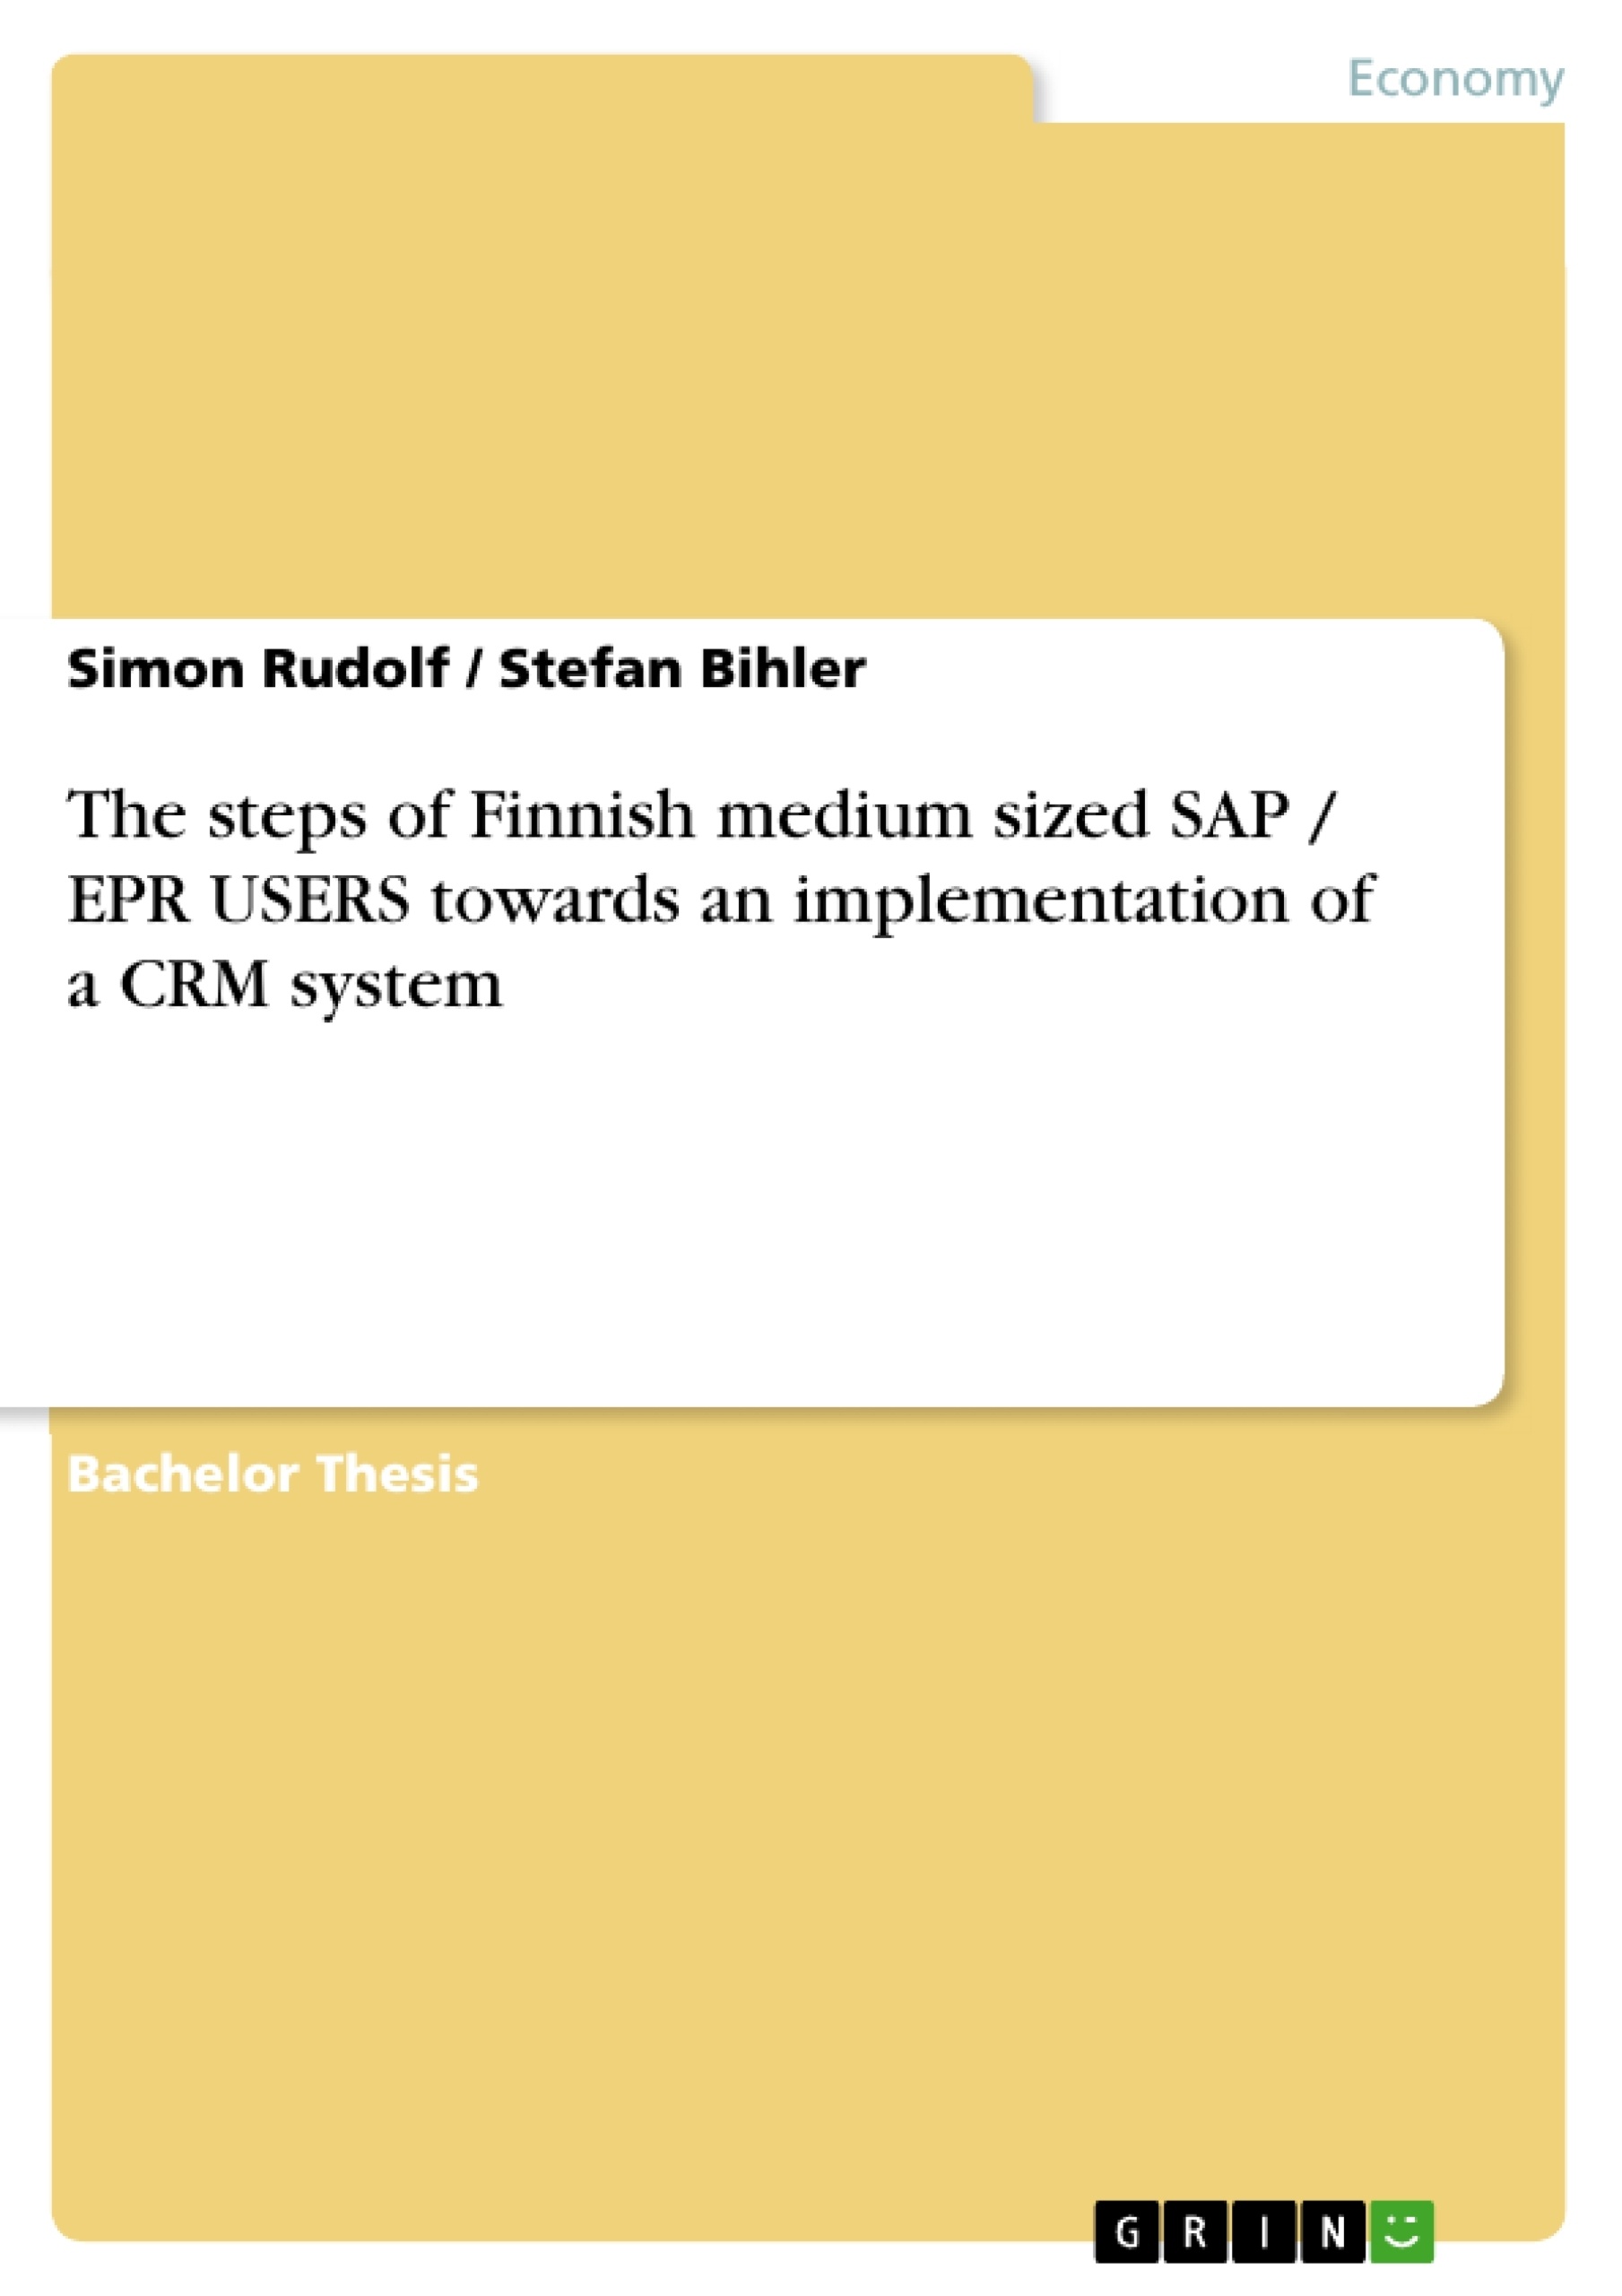 Titel: The steps of Finnish medium sized SAP / EPR USERS towards an implementation of a CRM system 